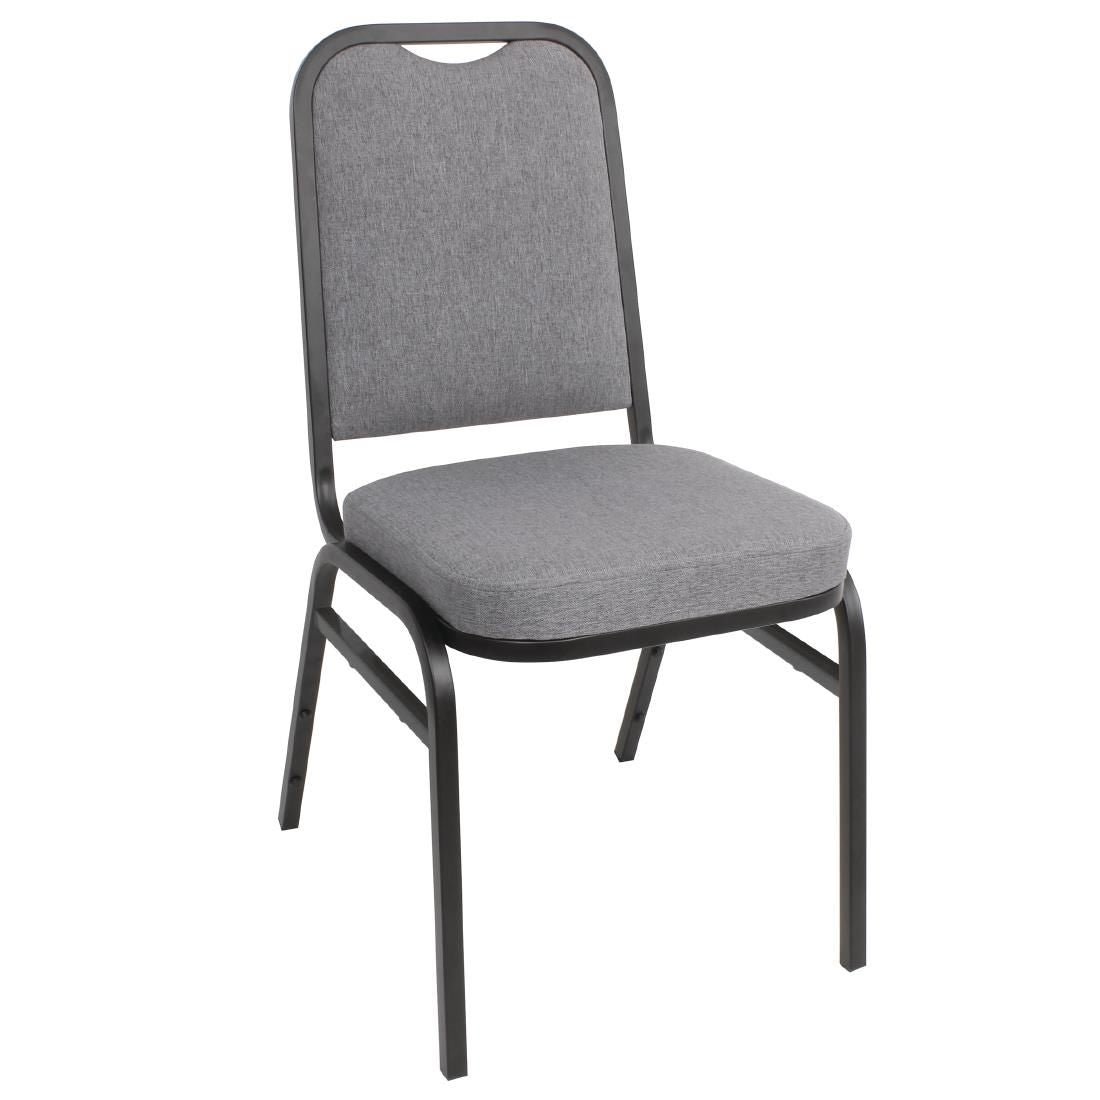 Bolero Square Back Banquet Chairs Black & Grey (Pack of 4) JD Catering Equipment Solutions Ltd